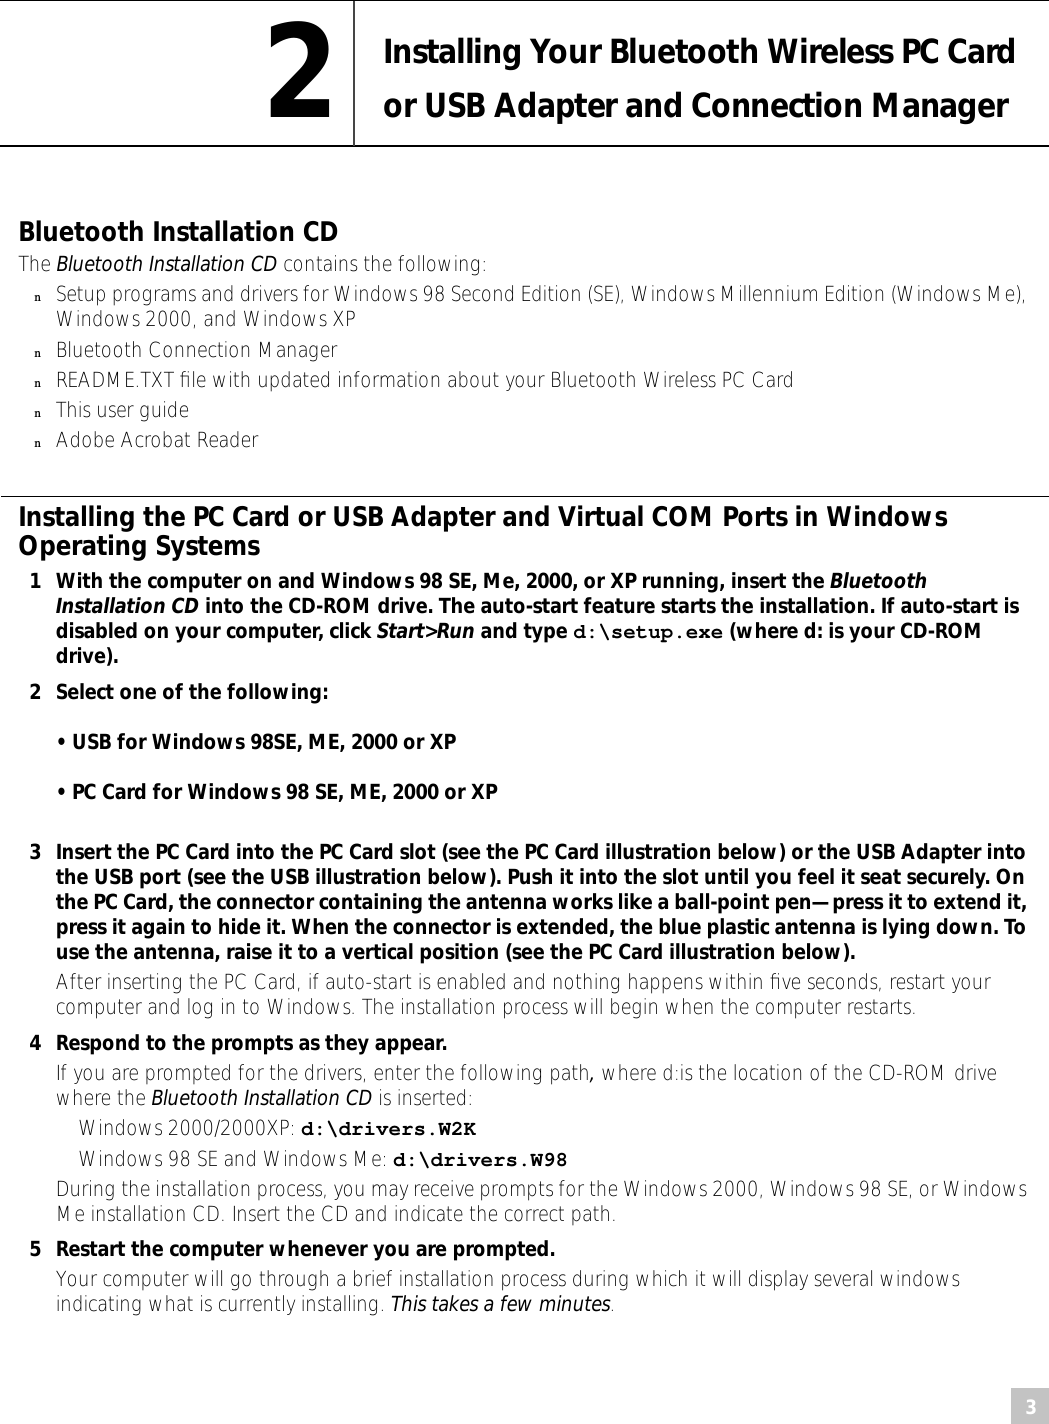  3 2 Installing Your Bluetooth Wireless PC Card or USB Adapter and Connection Manager Bluetooth Installation CD  The  Bluetooth Installation CD  contains the following: n Setup programs and drivers for Windows 98 Second Edition (SE), Windows Millennium Edition (Windows Me), Windows 2000, and Windows XP n Bluetooth Connection Manager  n README.TXT ﬁle with updated information about your Bluetooth Wireless PC Card  n This user guide  n Adobe Acrobat Reader Installing the PC Card or USB Adapter and Virtual COM Ports in Windows Operating Systems 1 With the computer on and Windows 98 SE, Me, 2000, or XP running, insert the  Bluetooth Installation CD  into the CD-ROM drive. The auto-start feature starts the installation. If auto-start is disabled on your computer, click  Start&gt;Run  and type  d:\setup.exe  (where d: is your CD-ROM drive).2 Select one of the following:• USB for Windows 98SE, ME, 2000 or XP• PC Card for Windows 98 SE, ME, 2000 or XP3 Insert the PC Card into the PC Card slot (see the PC Card illustration below) or the USB Adapter into the USB port (see the USB illustration below). Push it into the slot until you feel it seat securely. On the PC Card, the connector containing the antenna works like a ball-point pen—press it to extend it, press it again to hide it. When the connector is extended, the blue plastic antenna is lying down. To use the antenna, raise it to a vertical position (see the PC Card illustration below). After inserting the PC Card, if auto-start is enabled and nothing happens within ﬁve seconds, restart your computer and log in to Windows. The installation process will begin when the computer restarts. 4 Respond to the prompts as they appear. If you are prompted for the drivers, enter the following path ,  where d:is the location of the CD-ROM drive where the  Bluetooth Installation CD  is inserted: Windows 2000/2000XP:  d:\drivers.W2K  Windows 98 SE and Windows Me:  d:\drivers.W98 During the installation process, you may receive prompts for the Windows 2000, Windows 98 SE, or Windows Me installation CD. Insert the CD and indicate the correct path. 5 Restart the computer whenever you are prompted.  Your computer will go through a brief installation process during which it will display several windows indicating what is currently installing.  This takes a few minutes . 